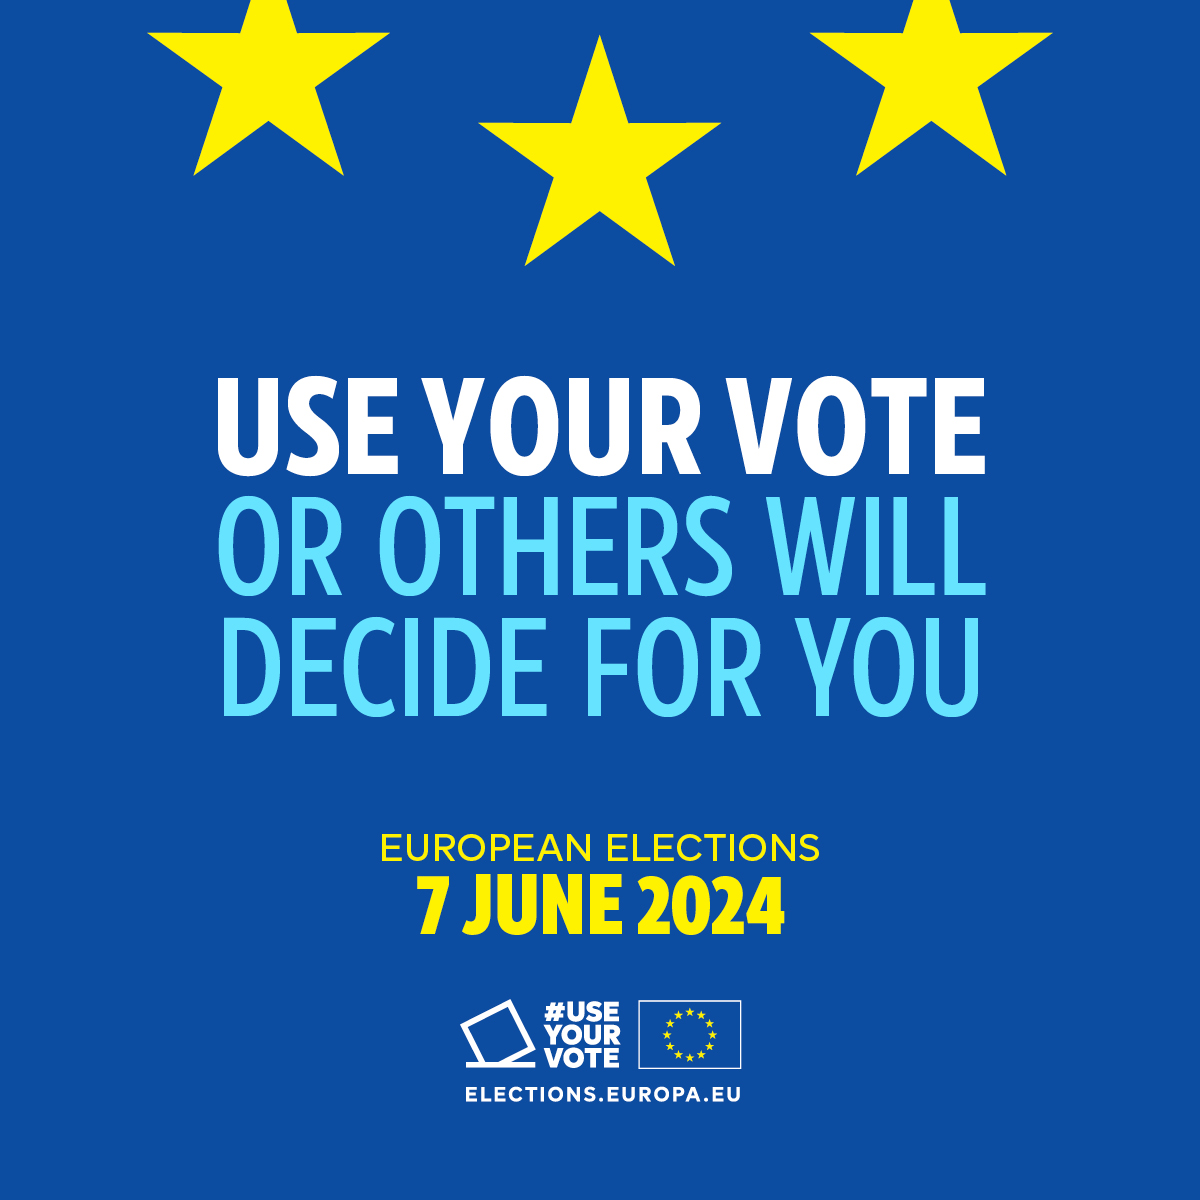 #UseYourVote. Or others will decide for you. 🇪🇺 How? 1️⃣ Register to vote by 20 May: checktheregister.ie 2️⃣ Sign up for voting reminders: europa.eu/!tVffmbc 3️⃣ Go to vote on 7 June! #EUelections2024 #EE24